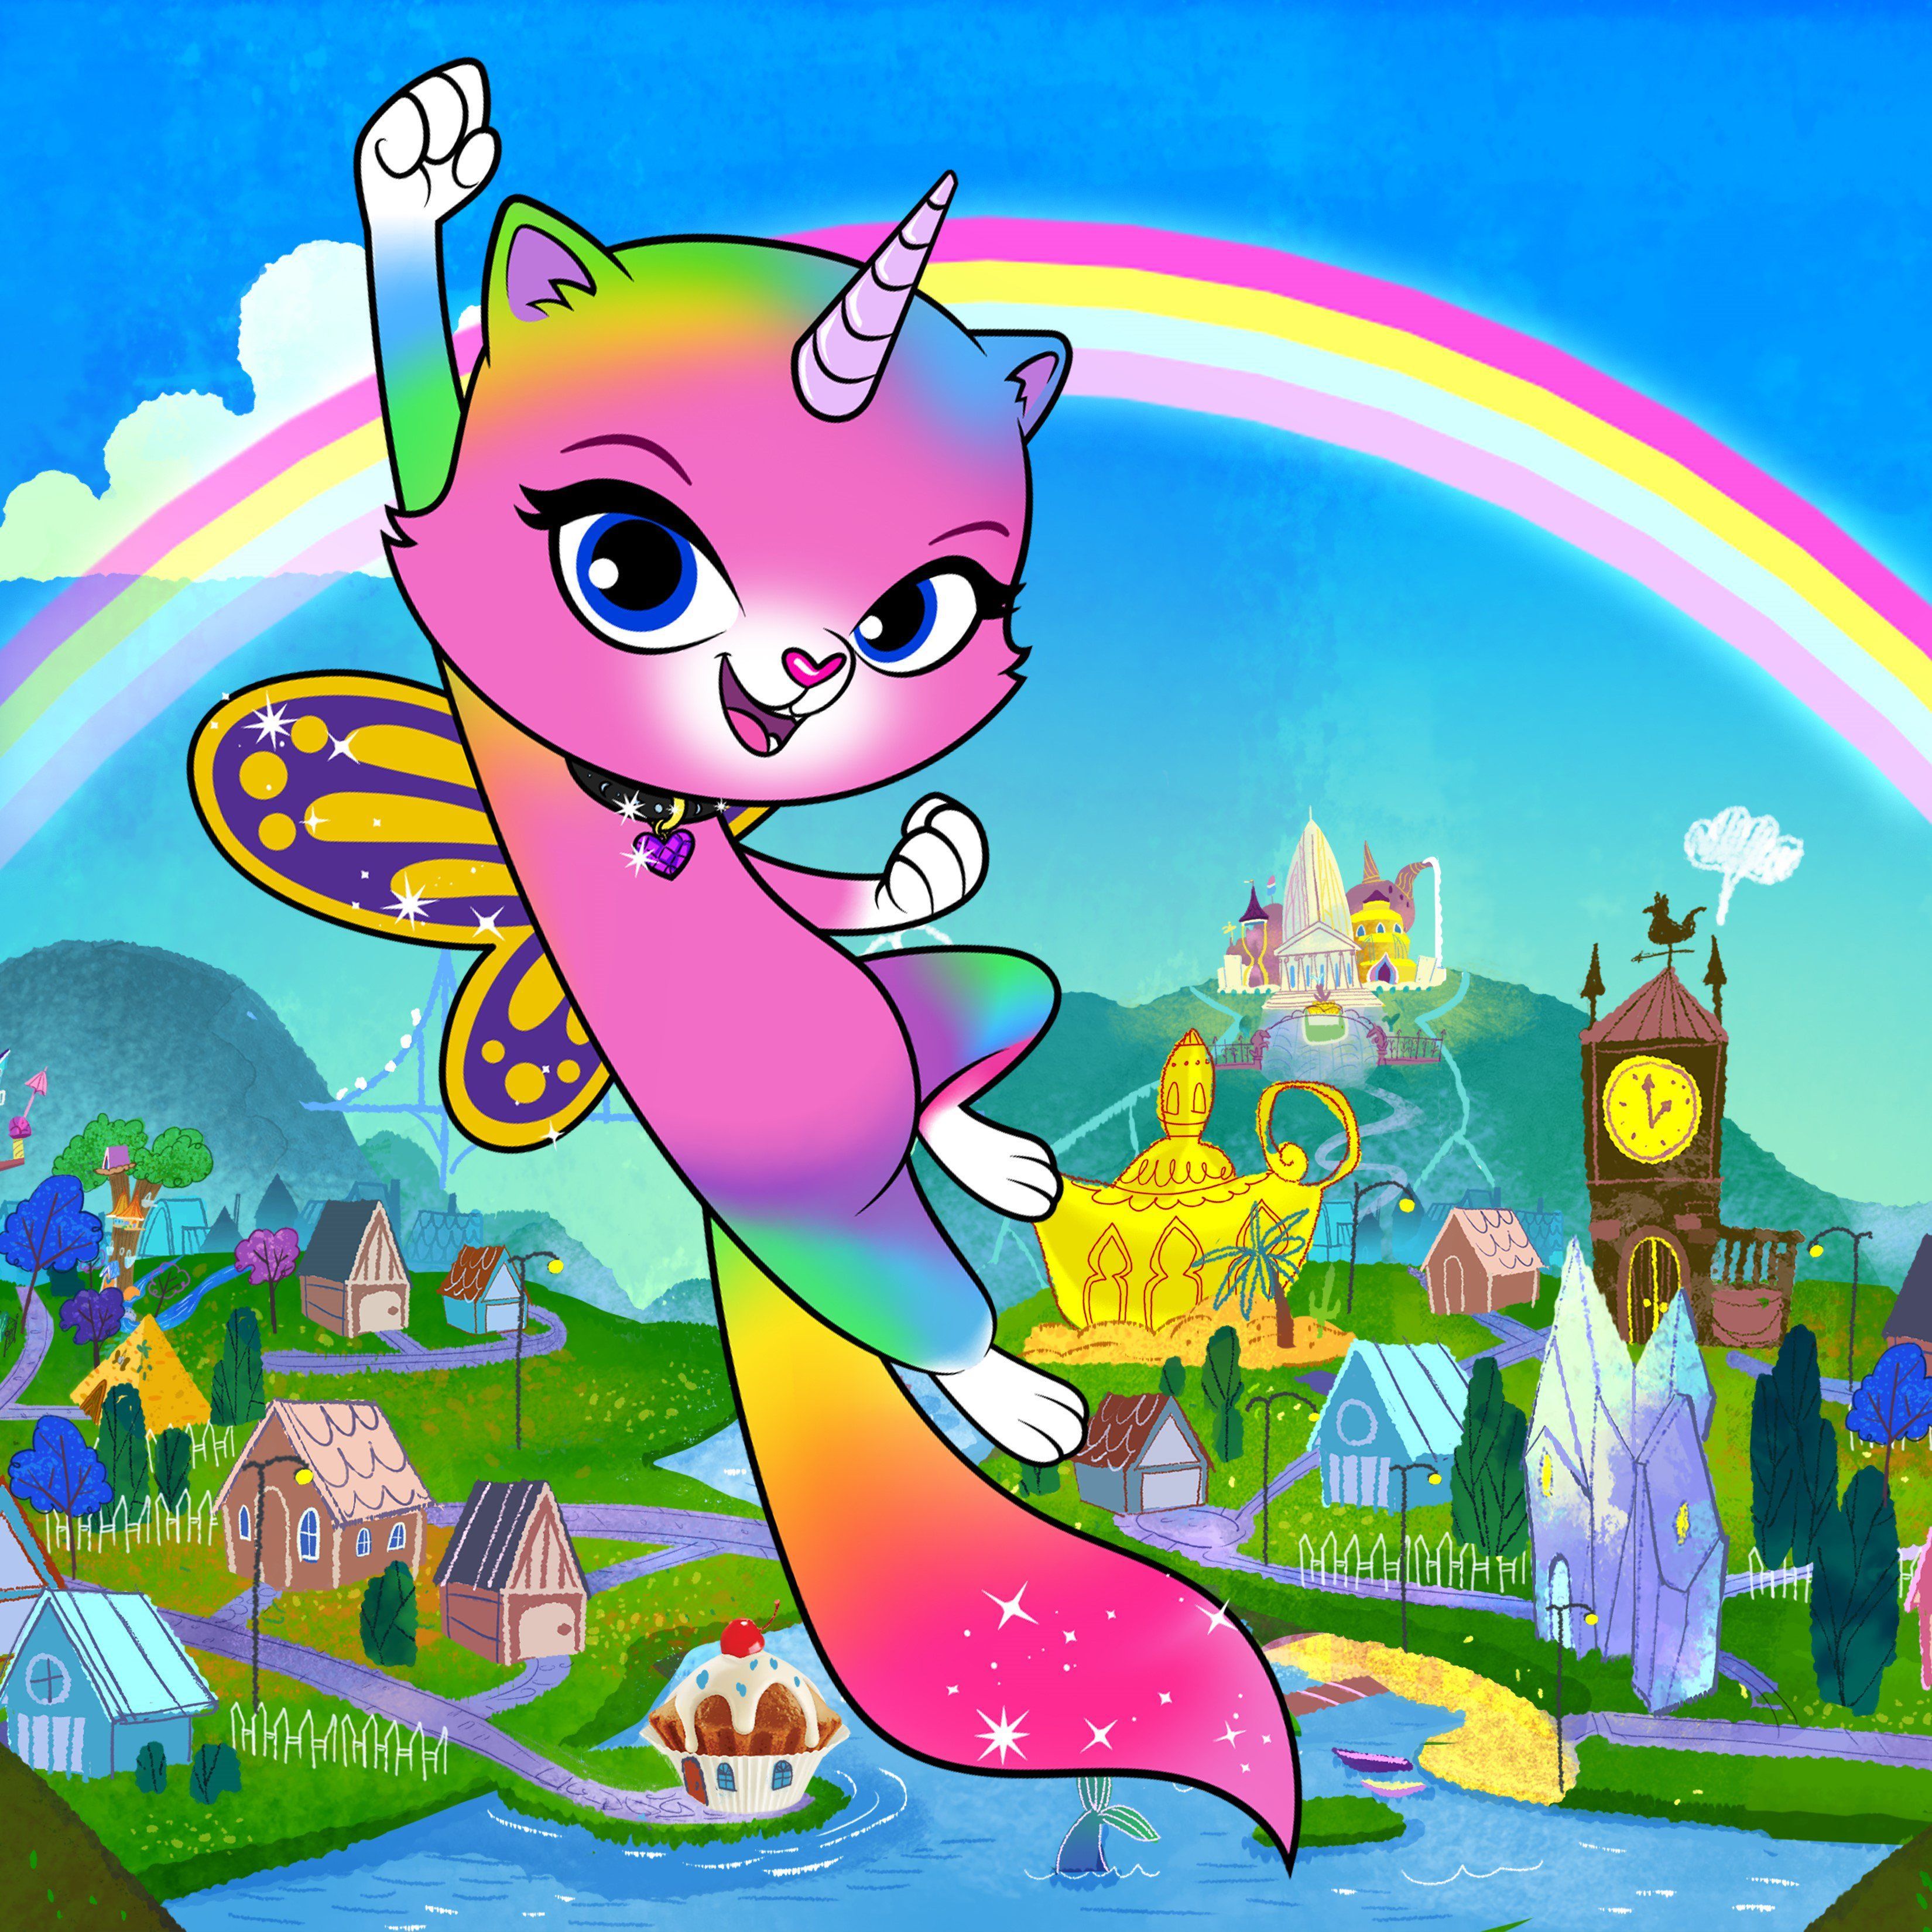 Rainbow Butterfly Unicorn Kitty: Nickelodeon Surprises Fans with New Animated Series. Rainbow butterfly, Unicorn cat, Cat party